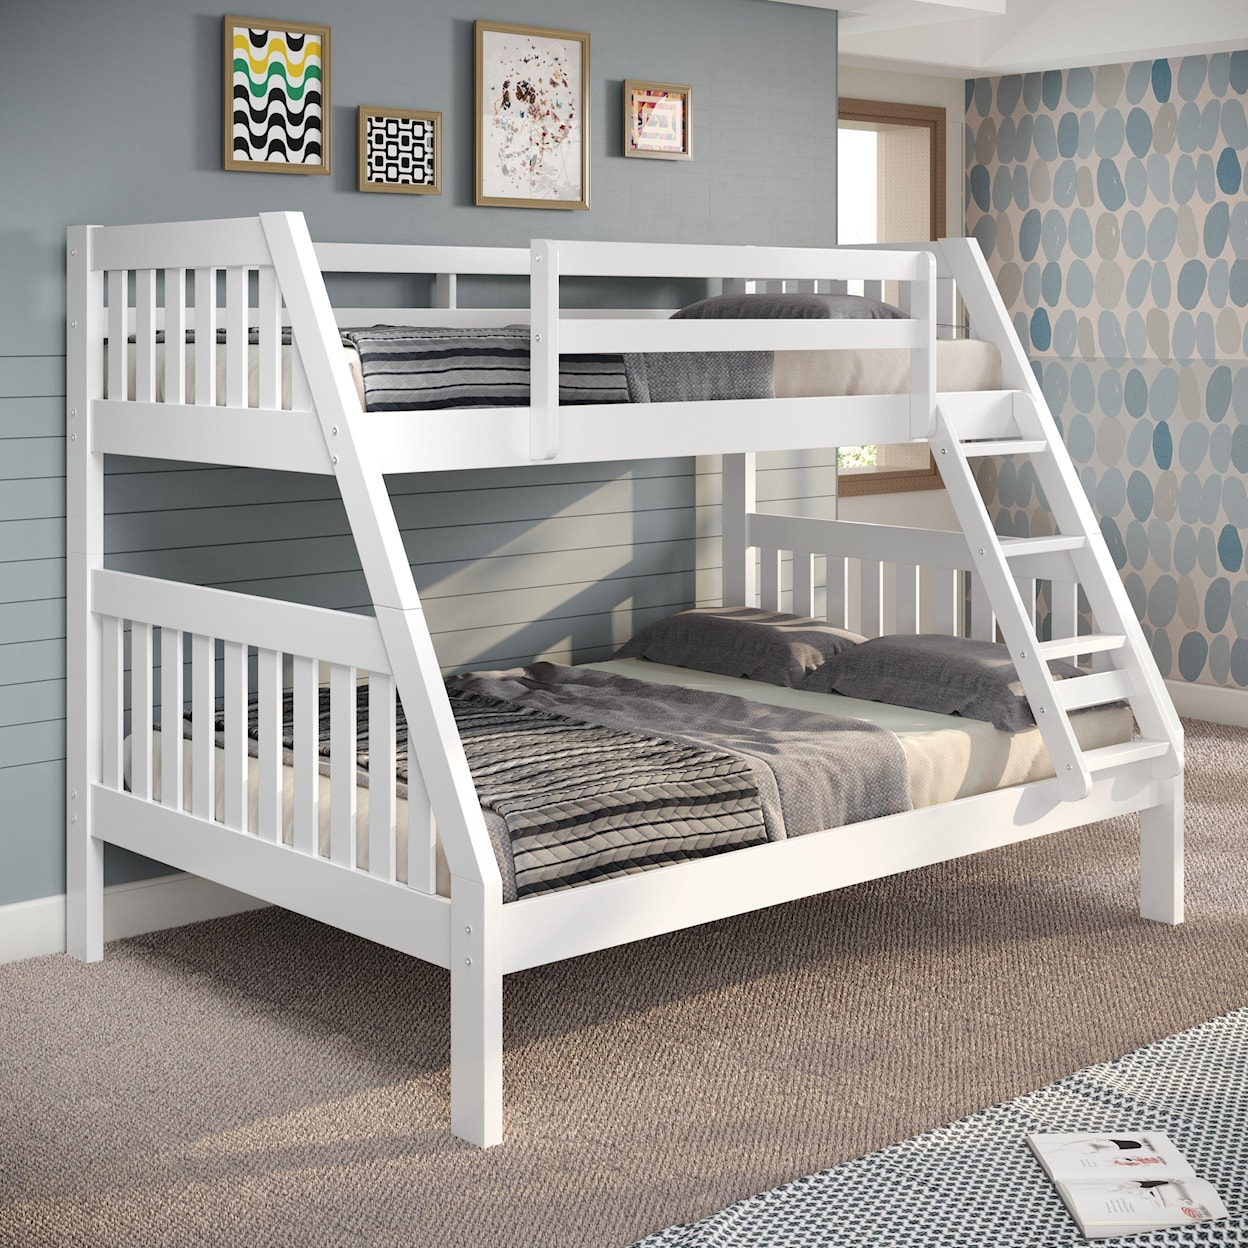 Canal House Mateo Mateo Twin over Full Bunk Bed